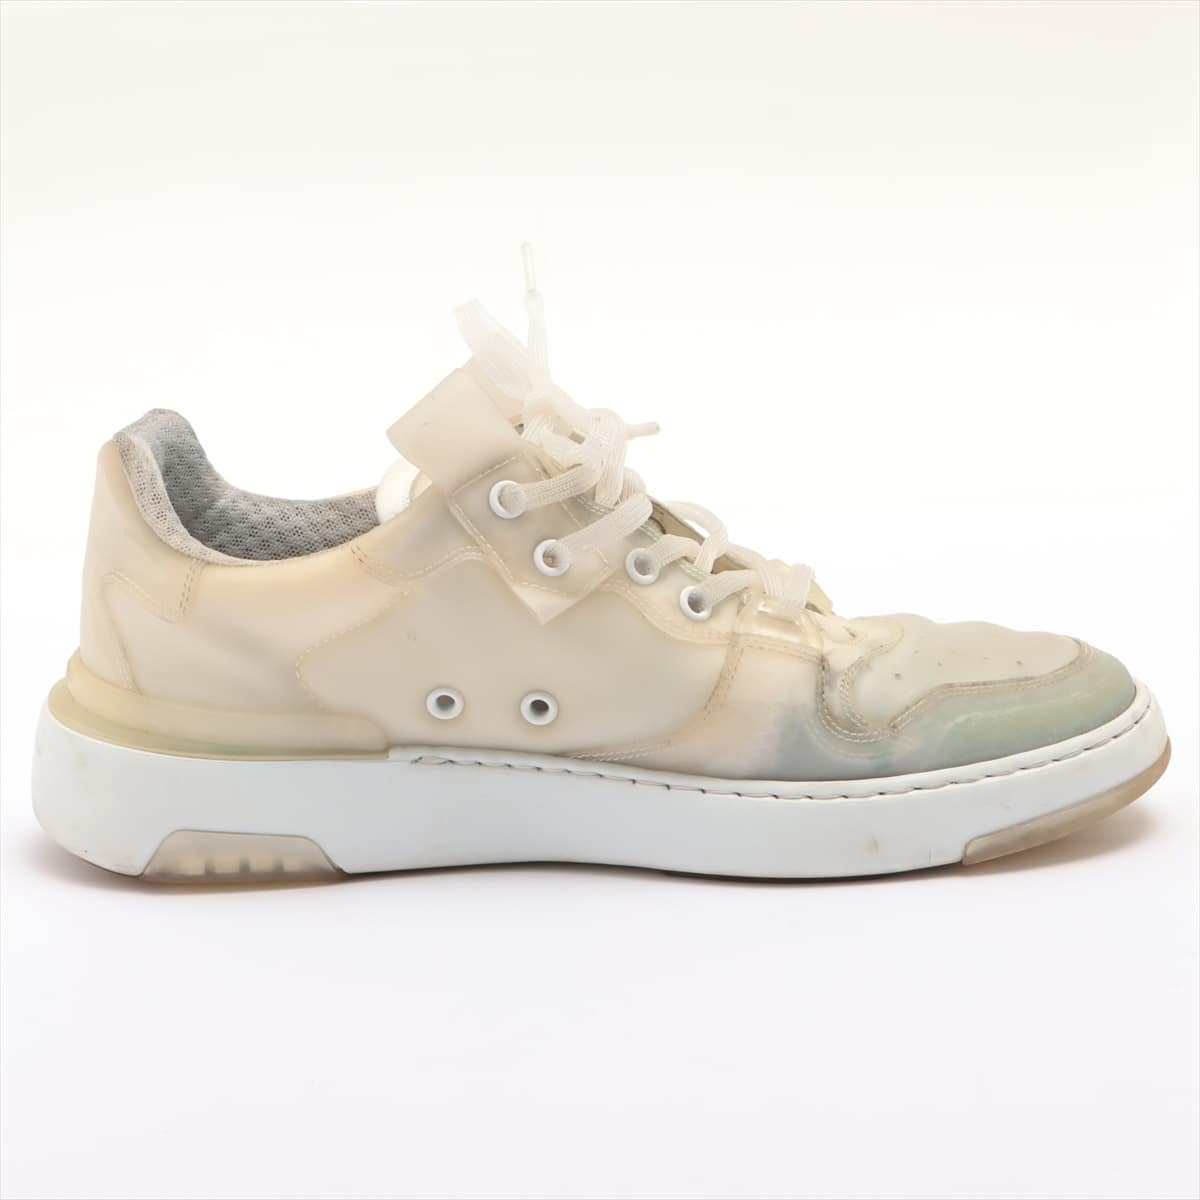 Givenchy Rubber Sneakers 41 Men's White BH002WH0MW